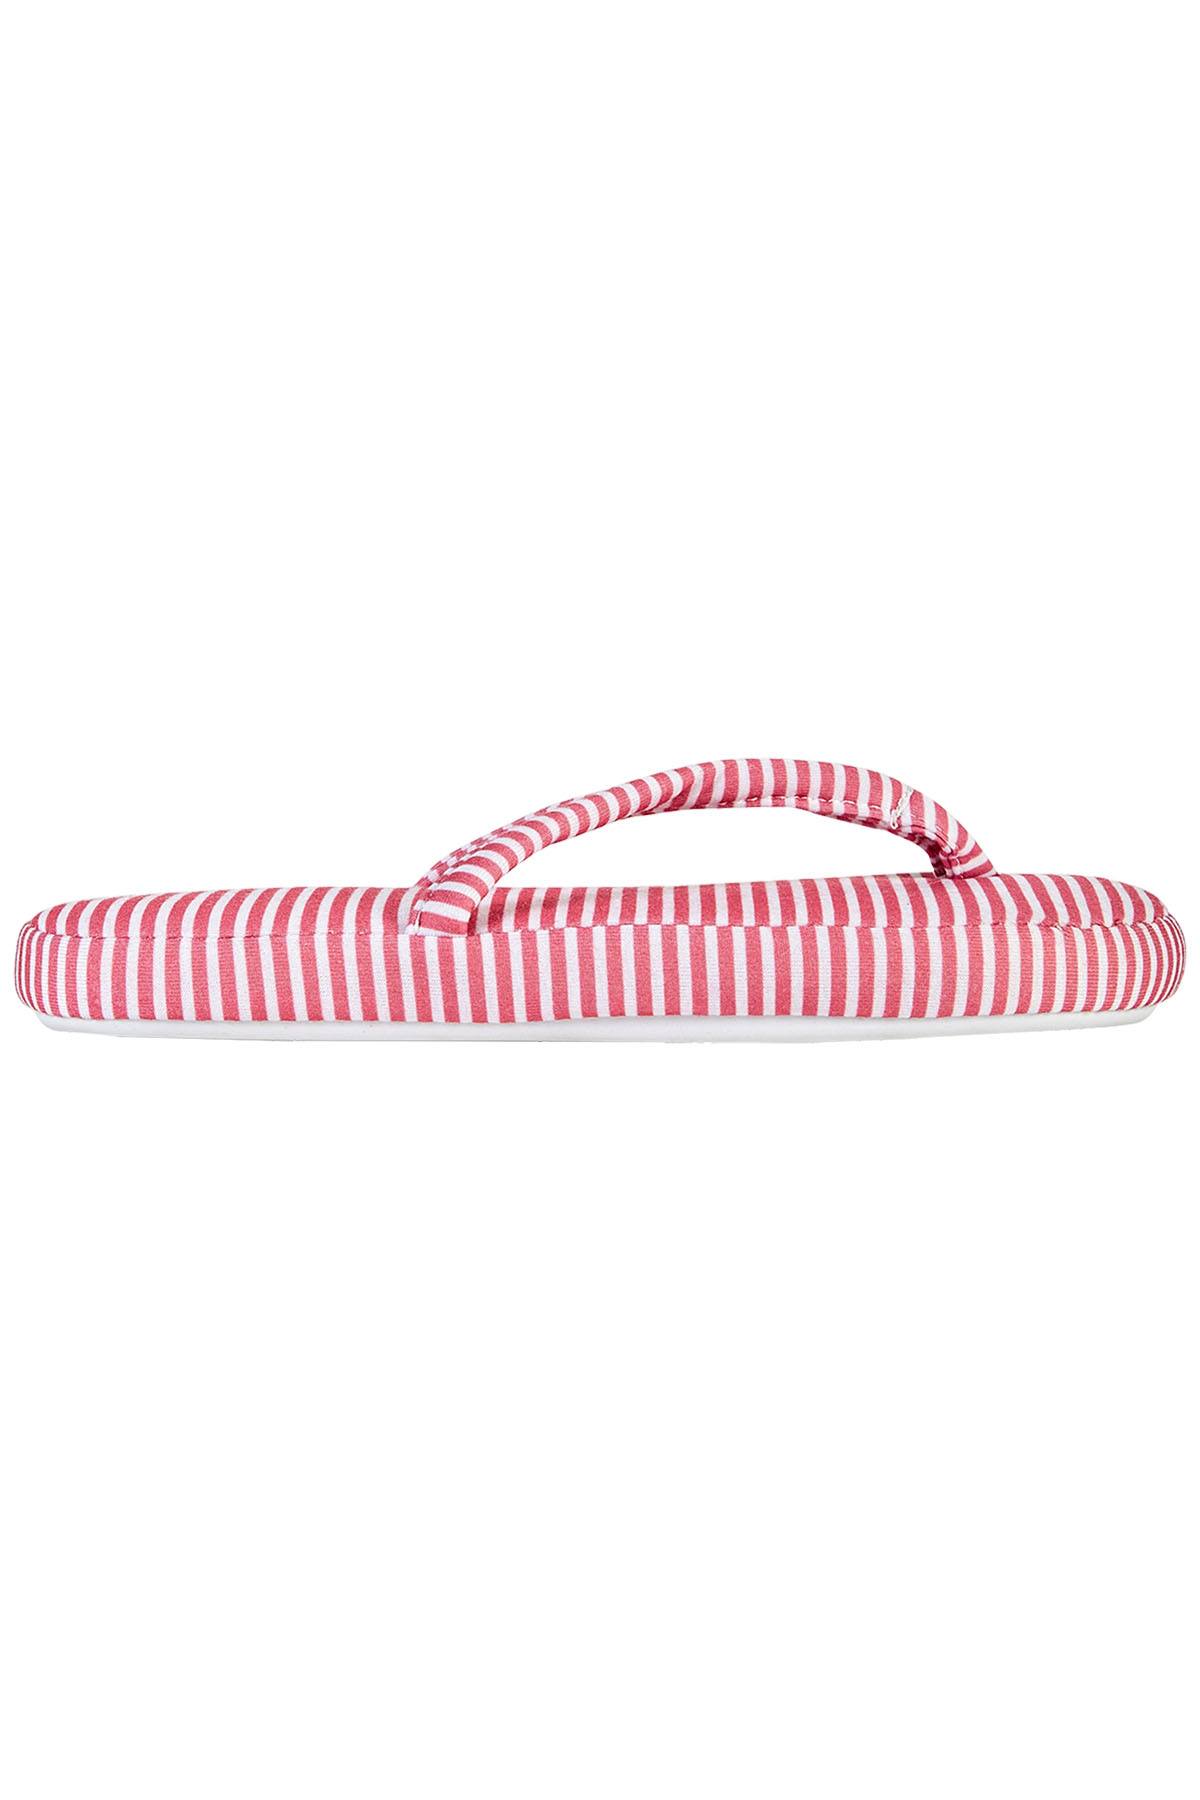 Charter Club Intimates Pink-Stripe Flip-Flop Slippers